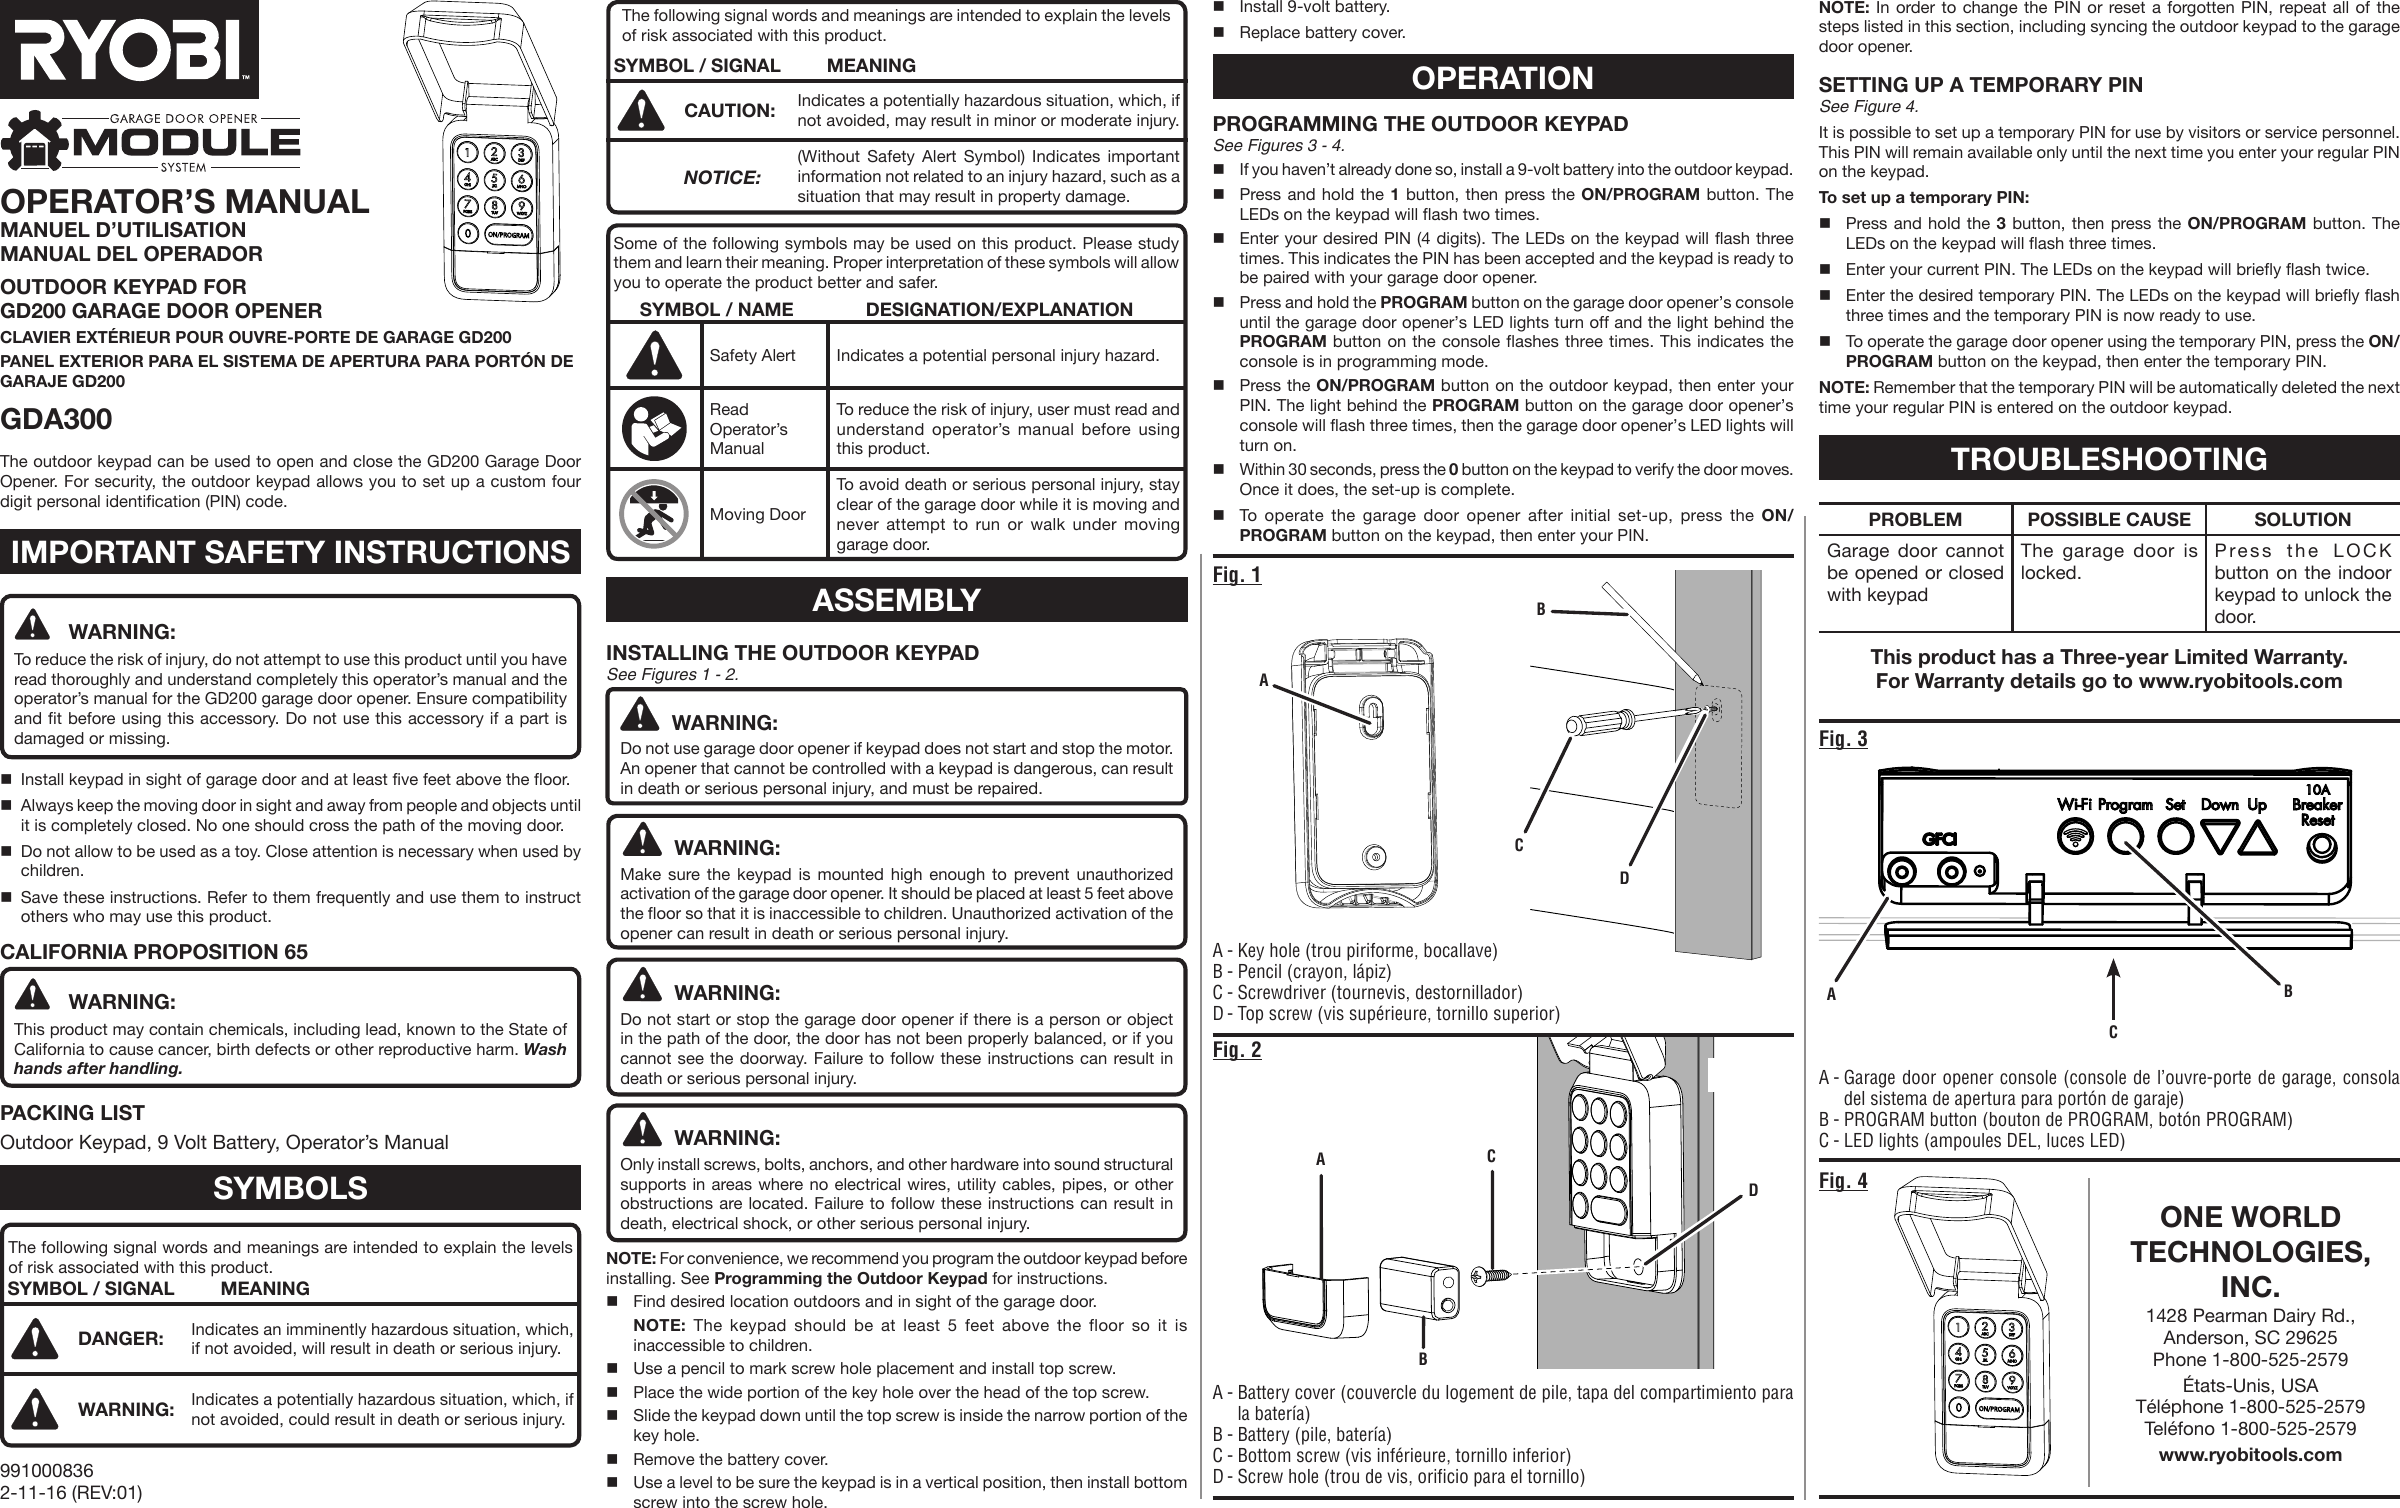 Fig. 4CABDOPERATOR’S MANUALMANUEL D’UTILISATION MANUAL DEL OPERADOROUTDOOR KEYPAD FOR  GD200 GARAGE DOOR OPENERCLAVIER EXTÉRIEUR POUR OUVRE-PORTE DE GARAGE GD200PANEL EXTERIOR PARA EL SISTEMA DE APERTURA PARA PORTÓN DE GARAJE GD200GDA300A - Key hole (trou piriforme, bocallave)B - Pencil (crayon, lápiz)C - Screwdriver (tournevis, destornillador)D - Top screw (vis supérieure, tornillo superior)WARNING:To reduce the risk of injury, do not attempt to use this product until you have read thoroughly and understand completely this operator’s manual and the operator’s manual for the GD200 garage door opener. Ensure compatibility and fit before using this accessory. Do not use this accessory if a part is damaged or missing.Install keypad in sight of garage door and at least five feet above the floor.Always keep the moving door in sight and away from people and objects until it is completely closed. No one should cross the path of the moving door.Do not allow to be used as a toy. Close attention is necessary when used by children.Save these instructions. Refer to them frequently and use them to instruct others who may use this product. CALIFORNIA PROPOSITION 65WARNING:This product may contain chemicals, including lead, known to the State of California to cause cancer, birth defects or other reproductive harm. Wash hands after handling.PACKING LISTOutdoor Keypad, 9 Volt Battery, Operator’s ManualSYMBOLSThe following signal words and meanings are intended to explain the levels of risk associated with this product.SYMBOL / SIGNAL MEANINGDANGER: Indicates an imminently hazardous situation, which, if not avoided, will result in death or serious injury.WARNING: Indicates a potentially hazardous situation, which, if not avoided, could result in death or serious injury.The following signal words and meanings are intended to explain the levels of risk associated with this product.SYMBOL / SIGNAL MEANINGCAUTION: Indicates a potentially hazardous situation, which, if not avoided, may result in minor or moderate injury. NOTICE:(Without Safety Alert Symbol) Indicates important information not related to an injury hazard, such as a situation that may result in property damage.Some of the following symbols may be used on this product. Please study them and learn their meaning. Proper interpretation of these symbols will allow you to operate the product better and safer.SYMBOL / NAME DESIGNATION/EXPLANATIONSafety Alert Indicates a potential personal injury hazard.Read Operator’s ManualTo reduce the risk of injury, user must read and understand operator’s manual before using this product.Moving DoorTo avoid death or serious personal injury, stay clear of the garage door while it is moving and never attempt to run or walk under moving garage door.ASSEMBLYINSTALLING THE OUTDOOR KEYPAD See Figures 1 - 2.WARNING:Do not use garage door opener if keypad does not start and stop the motor. An opener that cannot be controlled with a keypad is dangerous, can result in death or serious personal injury, and must be repaired. WARNING:Make sure the keypad is mounted high enough to prevent unauthorized activation of the garage door opener. It should be placed at least 5 feet above the floor so that it is inaccessible to children. Unauthorized activation of the opener can result in death or serious personal injury. WARNING:Do not start or stop the garage door opener if there is a person or object in the path of the door, the door has not been properly balanced, or if you cannot see the doorway. Failure to follow these instructions can result in death or serious personal injury.WARNING:Only install screws, bolts, anchors, and other hardware into sound structural supports in areas where no electrical wires, utility cables, pipes, or other obstructions are located. Failure to follow these instructions can result in death, electrical shock, or other serious personal injury.NOTE: For convenience, we recommend you program the outdoor keypad before installing. See Programming the Outdoor Keypad for instructions.Find desired location outdoors and in sight of the garage door.  NOTE: The keypad should be at least 5 feet above the floor so it is inaccessible to children.Use a pencil to mark screw hole placement and install top screw.Place the wide portion of the key hole over the head of the top screw.Slide the keypad down until the top screw is inside the narrow portion of the key hole.Remove the battery cover.Use a level to be sure the keypad is in a vertical position, then install bottom screw into the screw hole.IMPORTANT SAFETY INSTRUCTIONS9910008362-11-16 (REV:01)Fig. 1ABCDFig. 2A - Battery cover (couvercle du logement de pile, tapa del compartimiento para la batería)B - Battery (pile, batería)C - Bottom screw (vis inférieure, tornillo inferior)D - Screw hole (trou de vis, orificio para el tornillo)Fig. 3Install 9-volt battery.Replace battery cover.OPERATIONPROGRAMMING THE OUTDOOR KEYPAD See Figures 3 - 4.If you haven’t already done so, install a 9-volt battery into the outdoor keypad. Press and hold the 1 button, then press the ON/PROGRAM button. The LEDs on the keypad will flash two times.Enter your desired PIN (4 digits). The LEDs on the keypad will flash three times. This indicates the PIN has been accepted and the keypad is ready to be paired with your garage door opener.Press and hold the PROGRAM button on the garage door opener’s console until the garage door opener’s LED lights turn off and the light behind the PROGRAM button on the console flashes three times. This indicates the console is in programming mode.Press the ON/PROGRAM button on the outdoor keypad, then enter your PIN. The light behind the PROGRAM button on the garage door opener’s console will flash three times, then the garage door opener’s LED lights will turn on.Within 30 seconds, press the 0 button on the keypad to verify the door moves. Once it does, the set-up is complete.To operate the garage door opener after initial set-up, press the ON/PROGRAM button on the keypad, then enter your PIN.NOTE: In order to change the PIN or reset a forgotten PIN, repeat all of the steps listed in this section, including syncing the outdoor keypad to the garage door opener.SETTING UP A TEMPORARY PIN See Figure 4.It is possible to set up a temporary PIN for use by visitors or service personnel. This PIN will remain available only until the next time you enter your regular PIN on the keypad.To set up a temporary PIN:Press and hold the 3 button, then press the ON/PROGRAM button. The LEDs on the keypad will flash three times.Enter your current PIN. The LEDs on the keypad will briefly flash twice. Enter the desired temporary PIN. The LEDs on the keypad will briefly flash three times and the temporary PIN is now ready to use.To operate the garage door opener using the temporary PIN, press the ON/PROGRAM button on the keypad, then enter the temporary PIN.NOTE: Remember that the temporary PIN will be automatically deleted the next time your regular PIN is entered on the outdoor keypad. A - Garage door opener console (console de l’ouvre-porte de garage, consola del sistema de apertura para portón de garaje)B - PROGRAM button (bouton de PROGRAM, botón PROGRAM)C - LED lights (ampoules DEL, luces LED) ACPROBLEM POSSIBLE CAUSE SOLUTIONGarage door cannot be opened or closed with keypadThe garage door is locked.Press the LOCK button on the indoor keypad to unlock the door.The outdoor keypad can be used to open and close the GD200 Garage Door Opener. For security, the outdoor keypad allows you to set up a custom four digit personal identification (PIN) code.ONE WORLD TECHNOLOGIES, INC.1428 Pearman Dairy Rd., Anderson, SC 29625 Phone 1-800-525-2579 États-Unis, USA Téléphone 1-800-525-2579  Teléfono 1-800-525-2579www.ryobitools.comThis product has a Three-year Limited Warranty.For Warranty details go to www.ryobitools.comBTROUBLESHOOTING